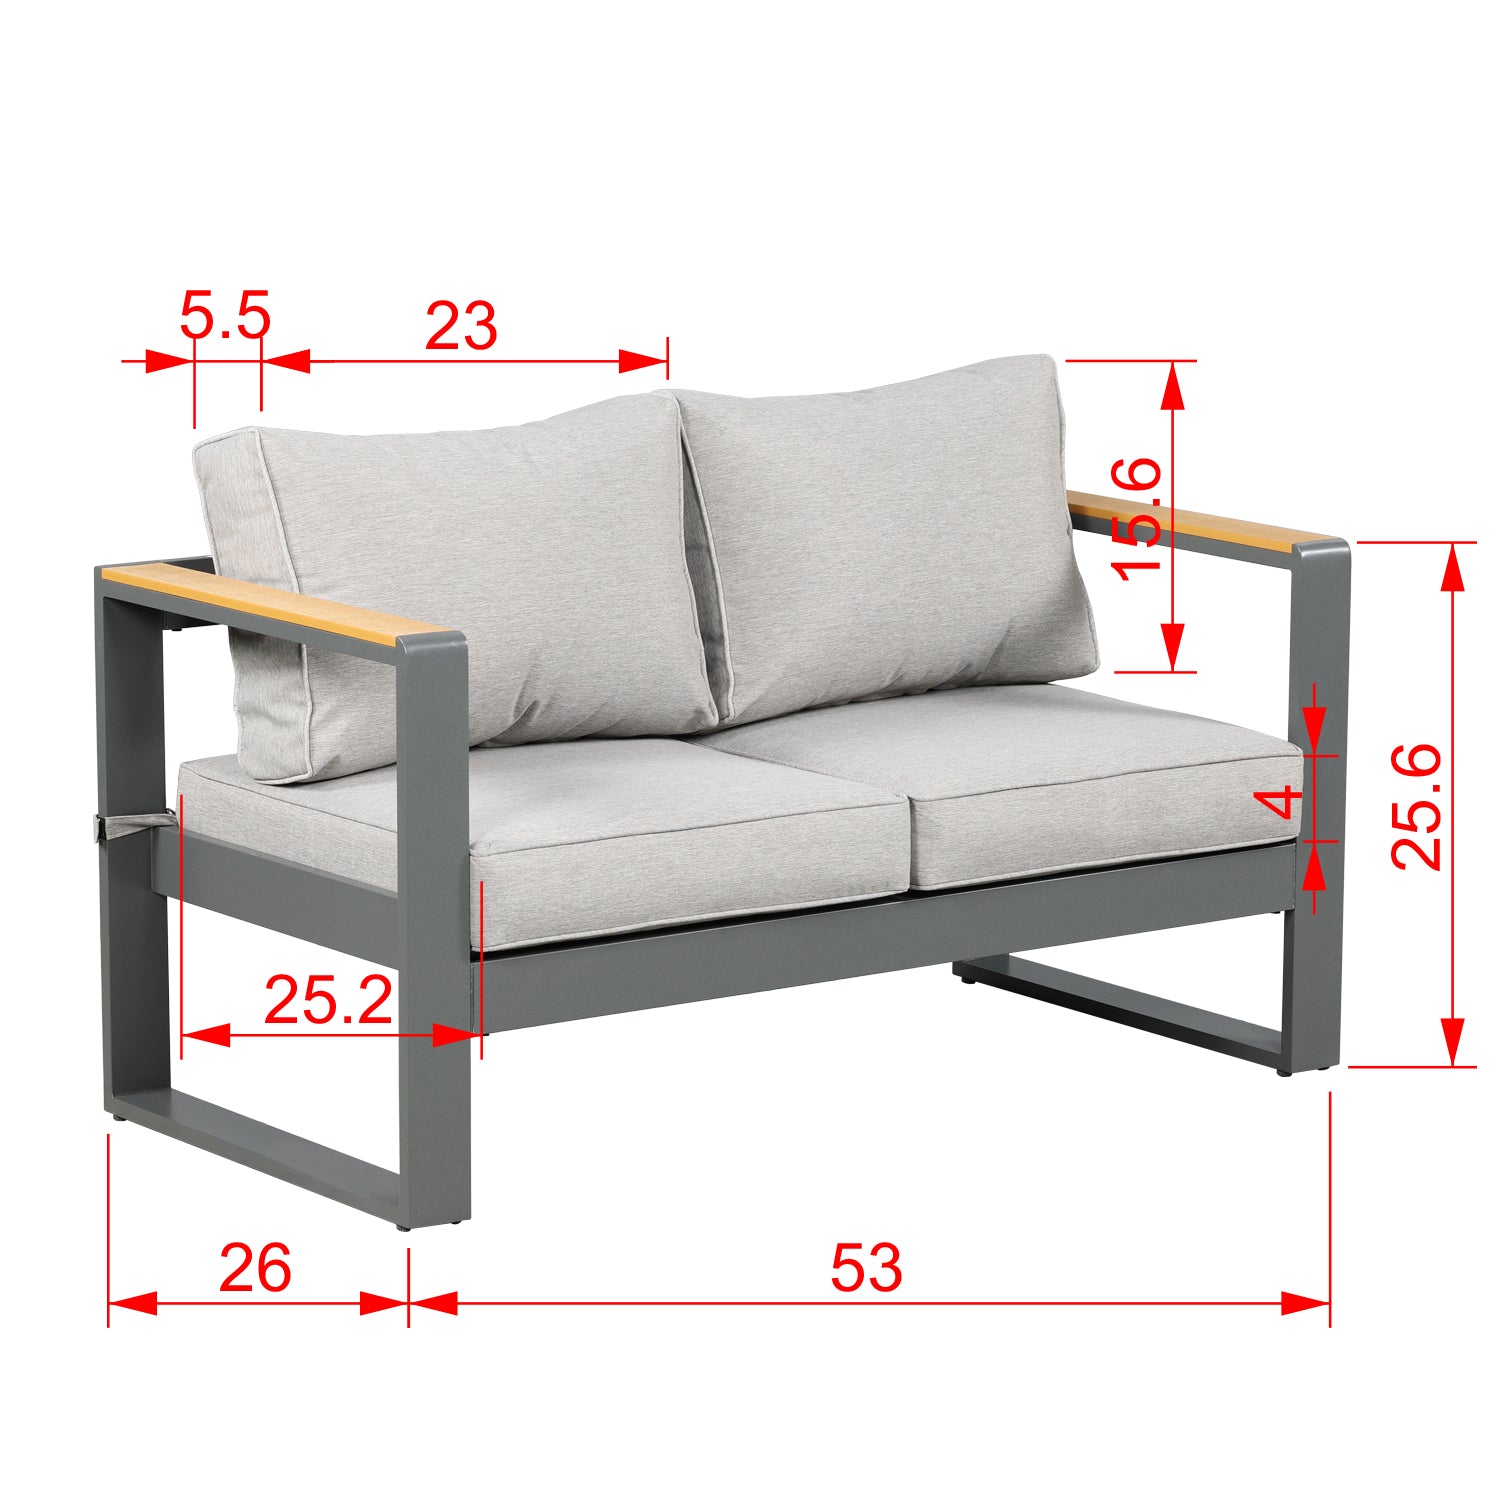 Patio Furniture Loveseat Aluminum Sofa Couch Deep Seat - All-Weather Resistant Outdoor Conversation Set with Thick Cushions Furniture Aoodor LLC   